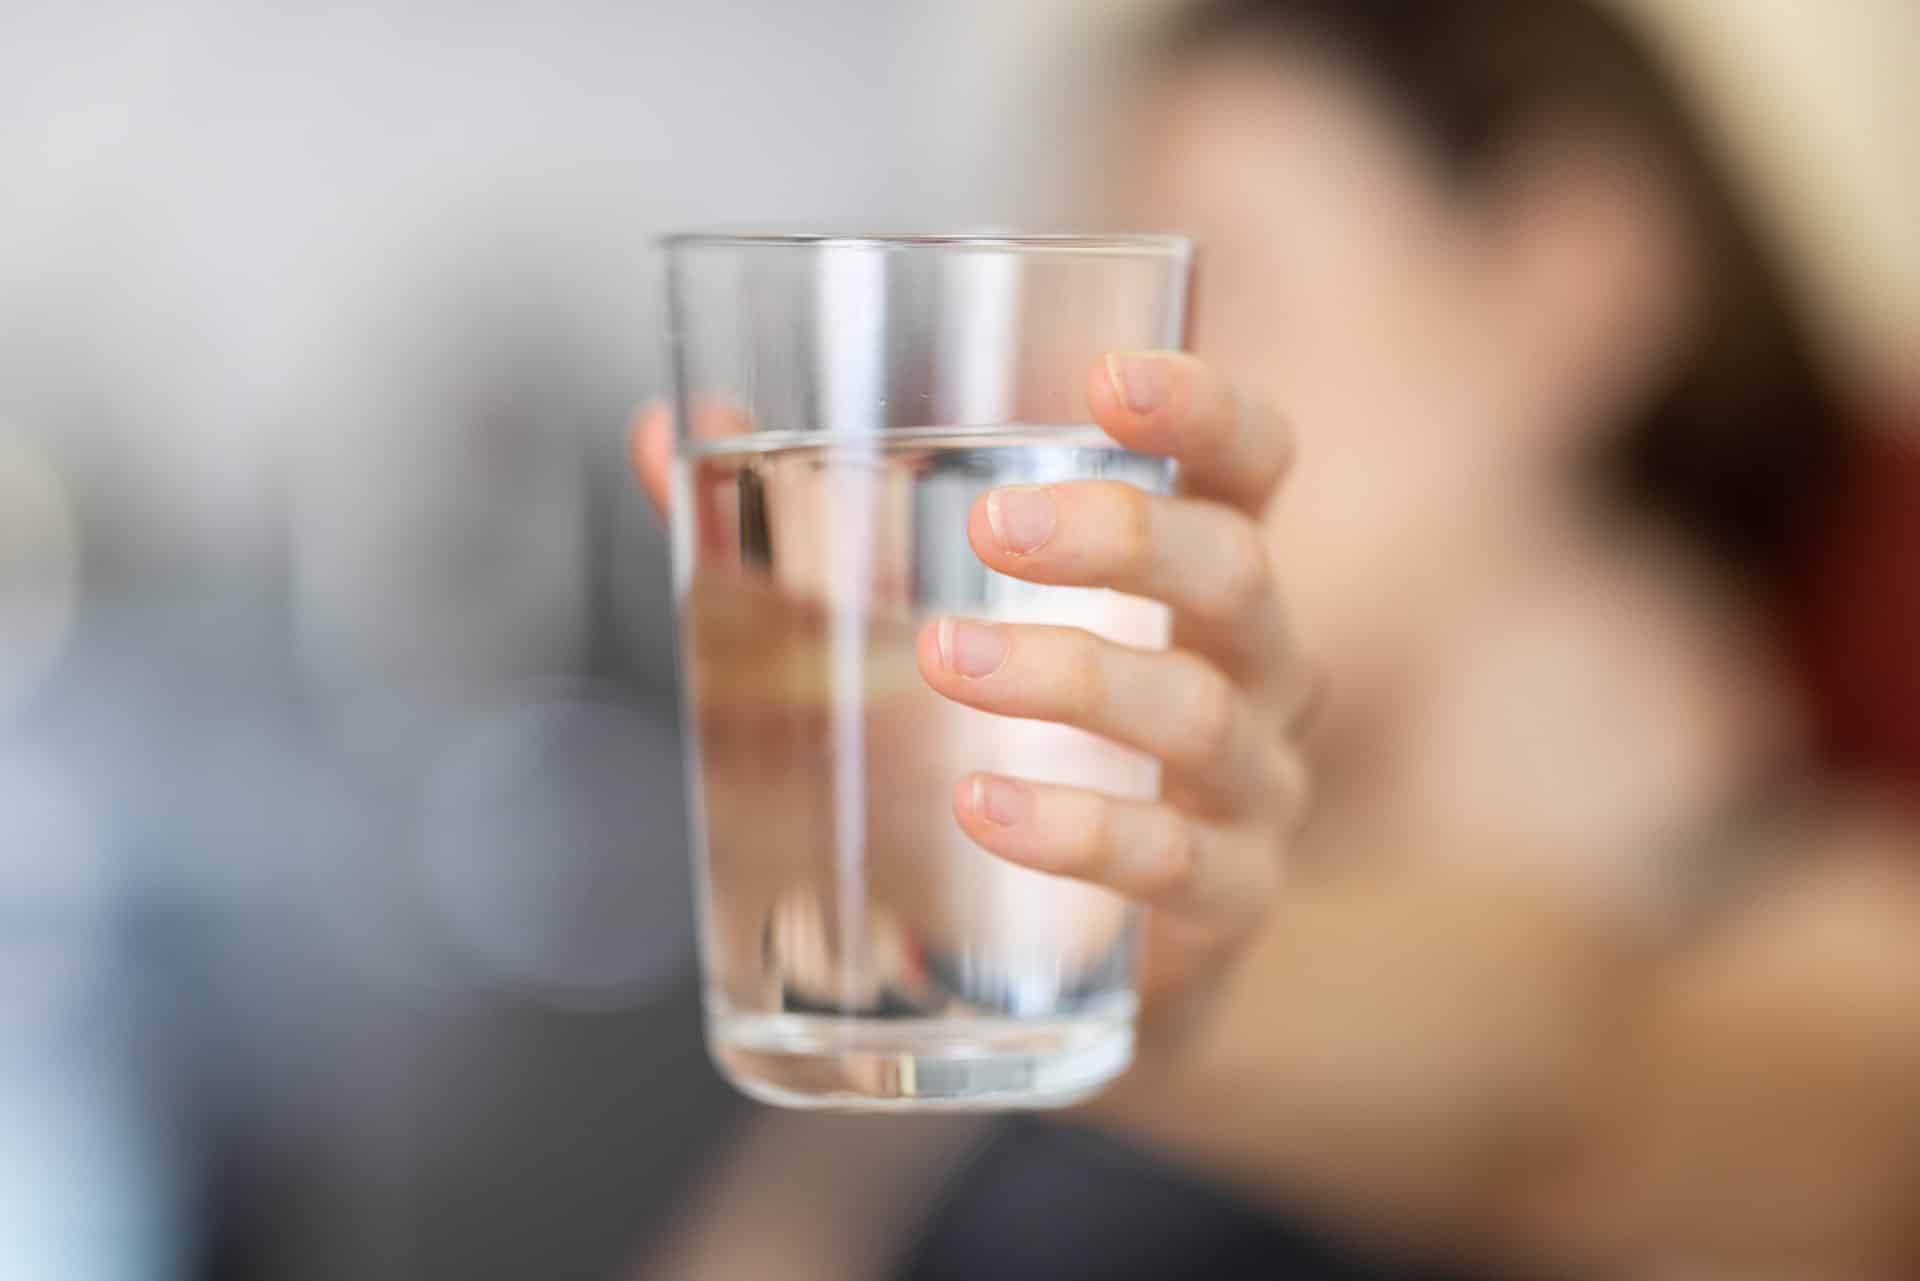 here's how to get healthy teeth: drink more water